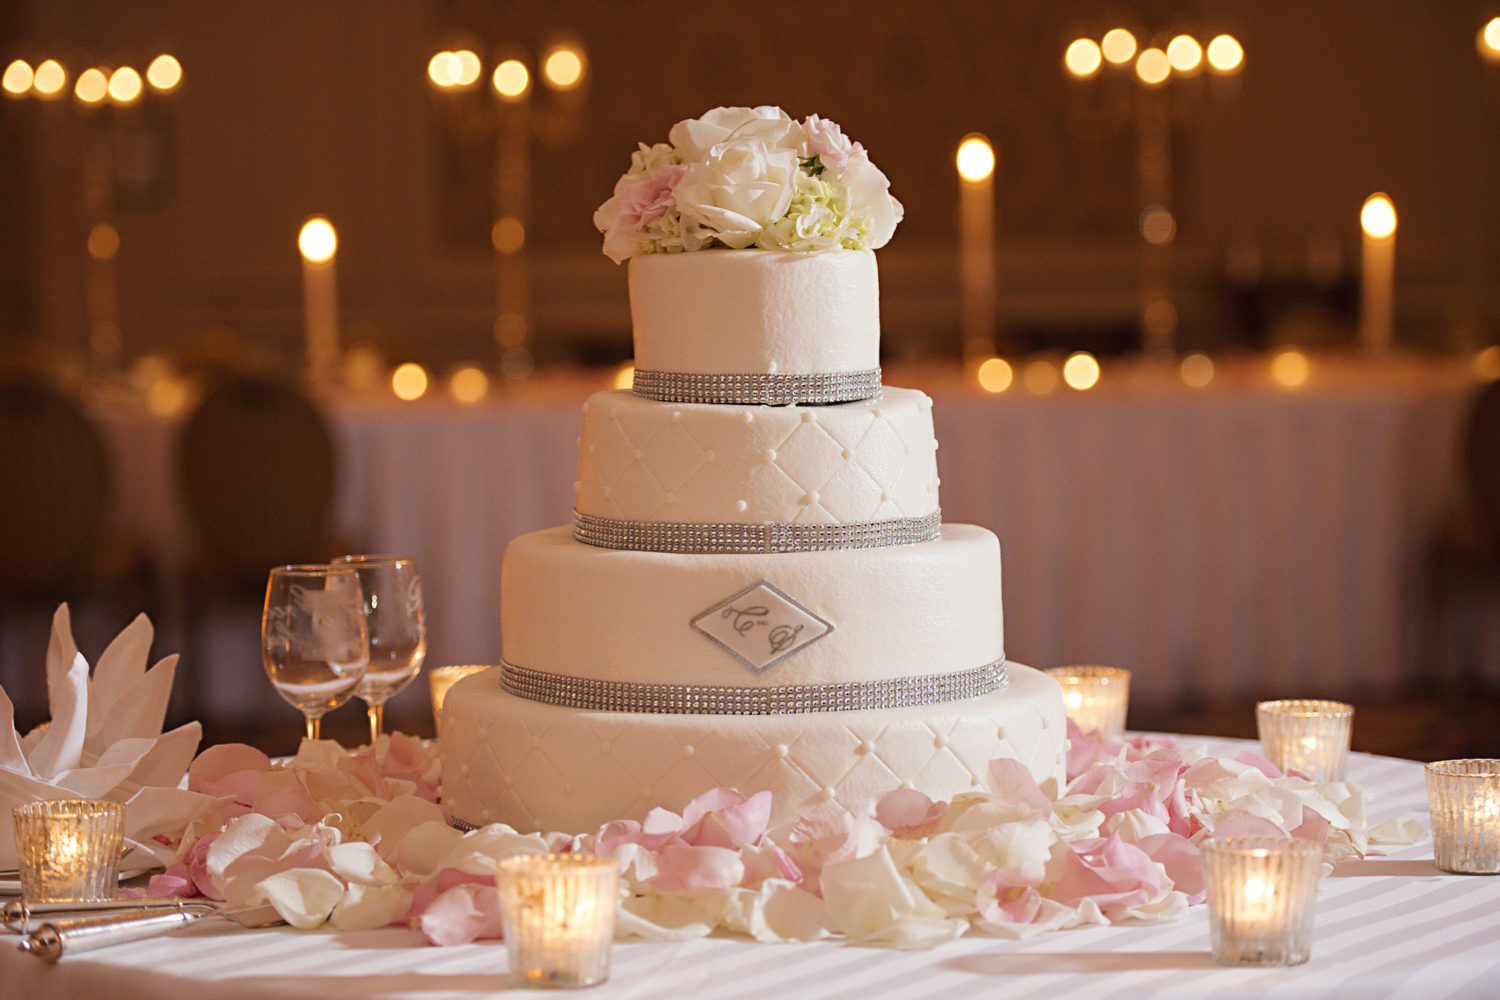 Icing on the Cake Wedding Cake - event coordination Simple Elegance